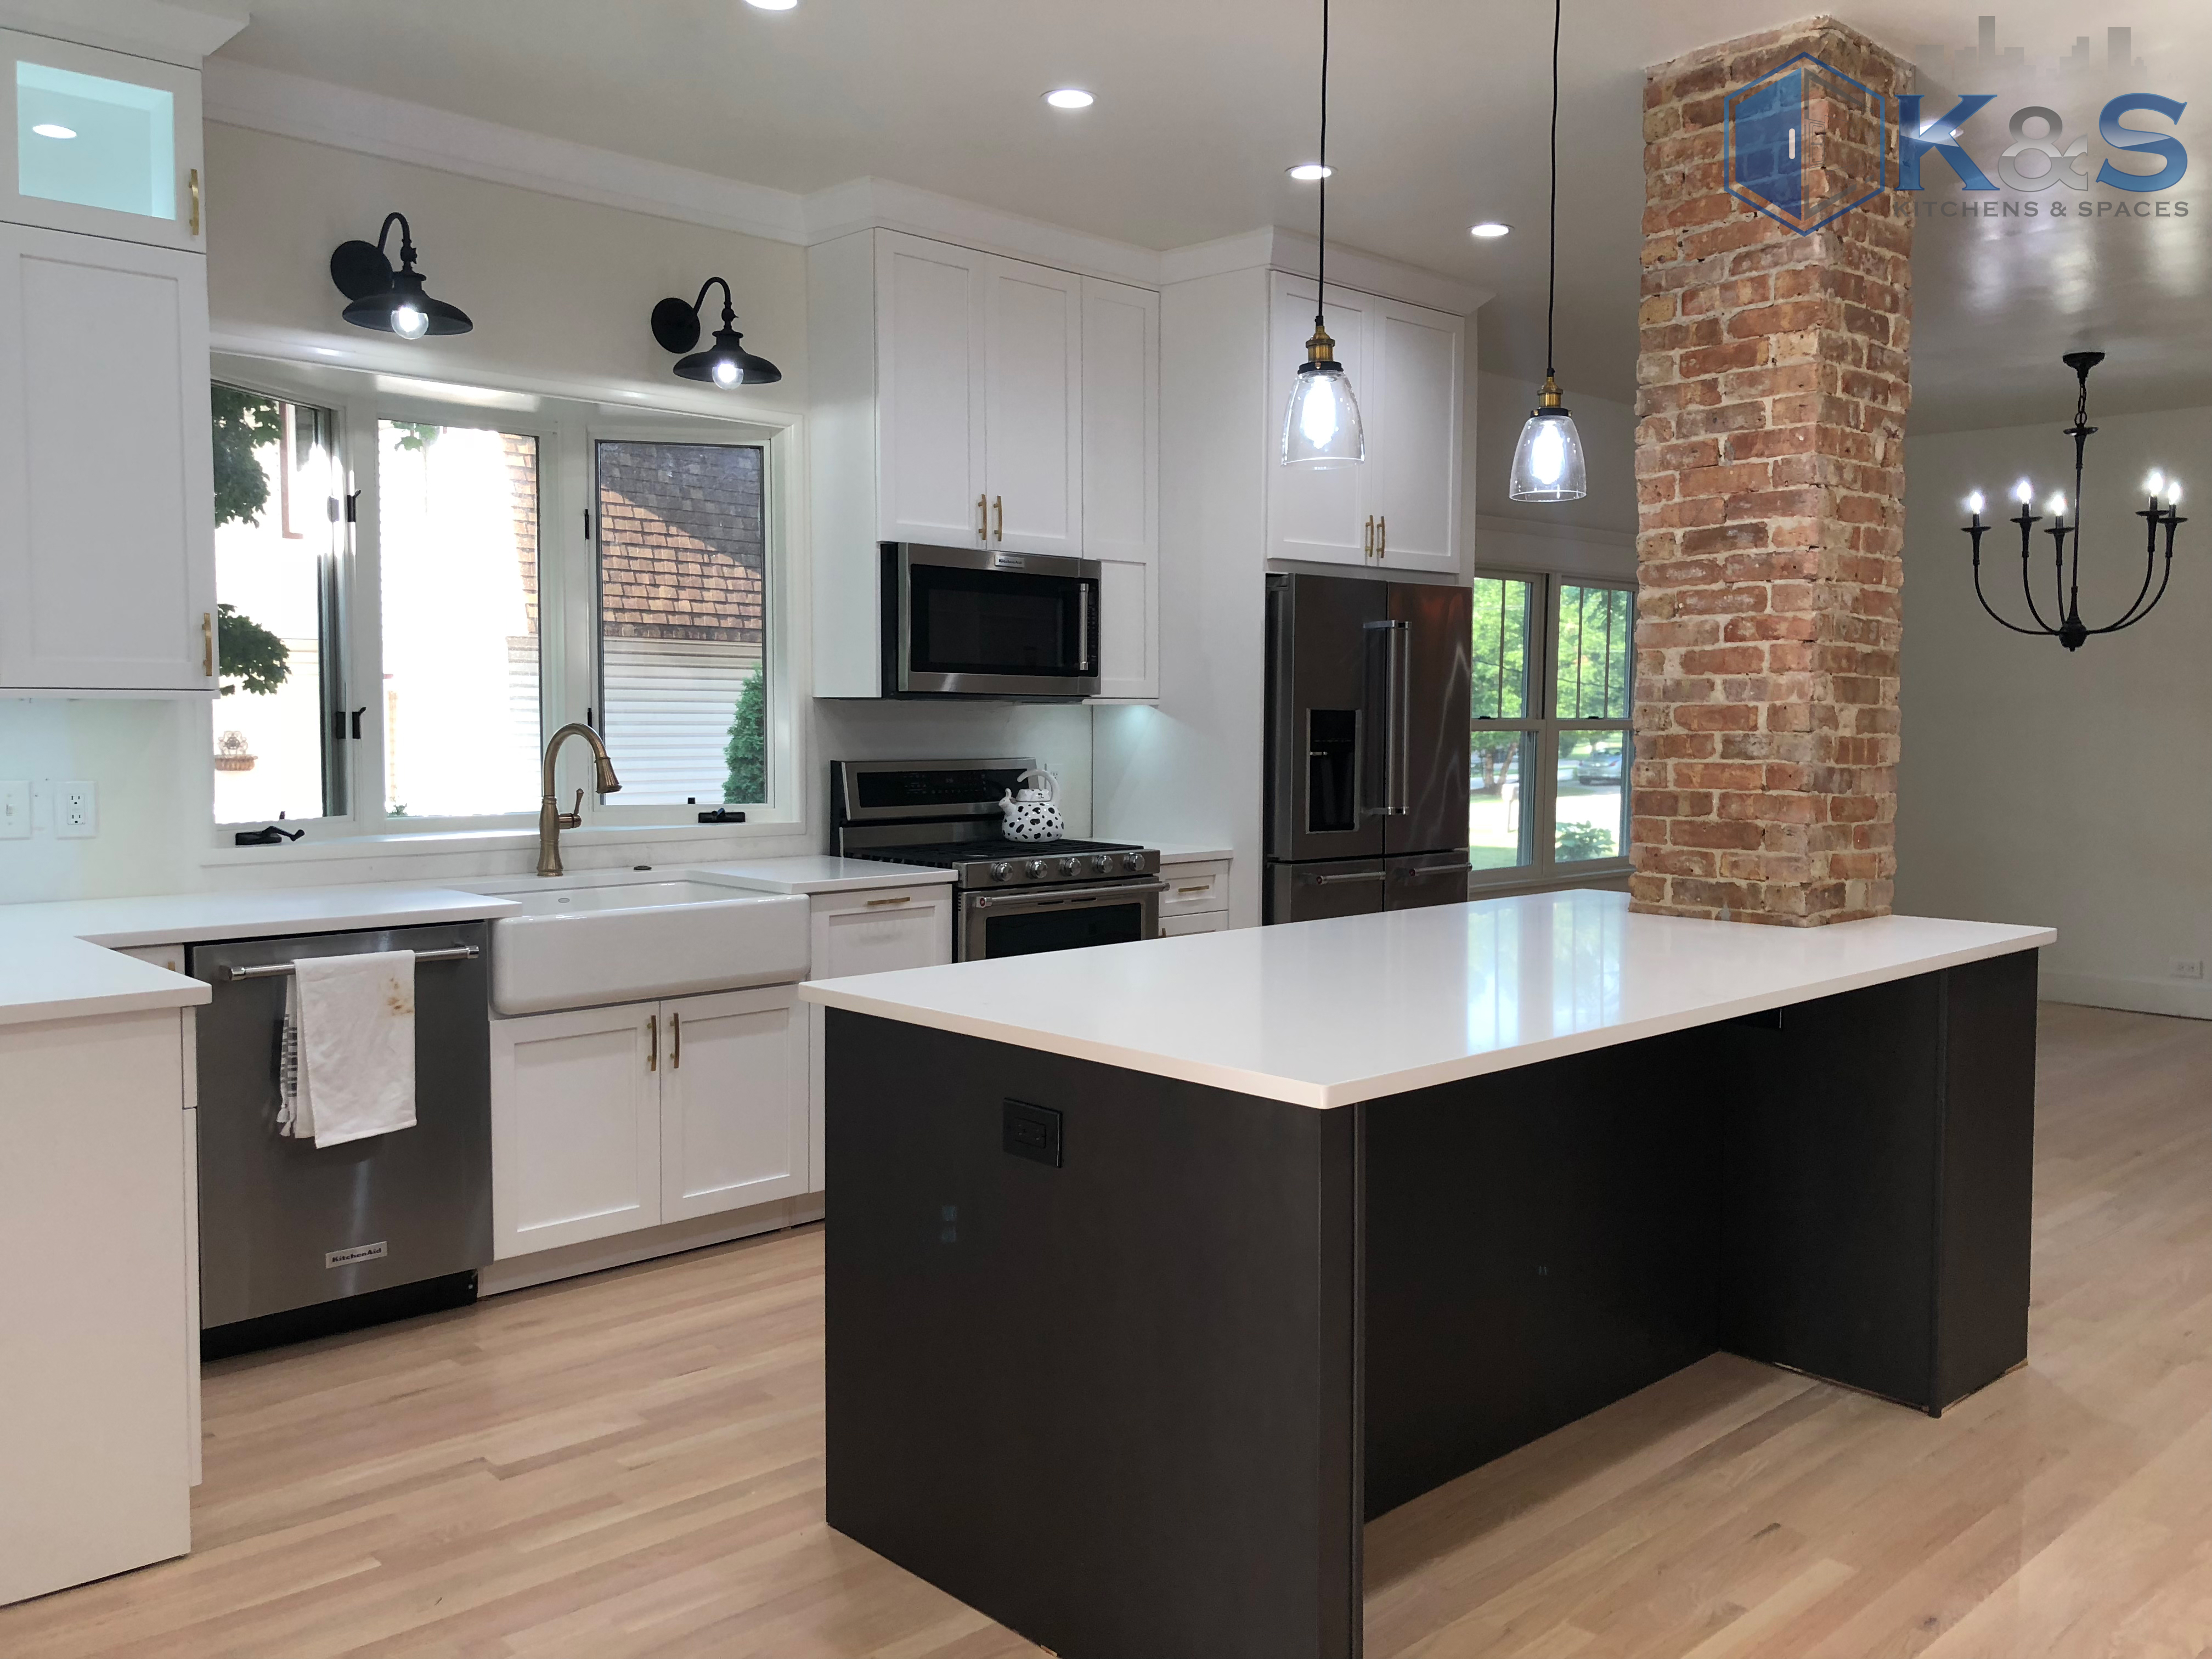 Difference Between Kitchen Remodel And Renovation - Best Design Idea